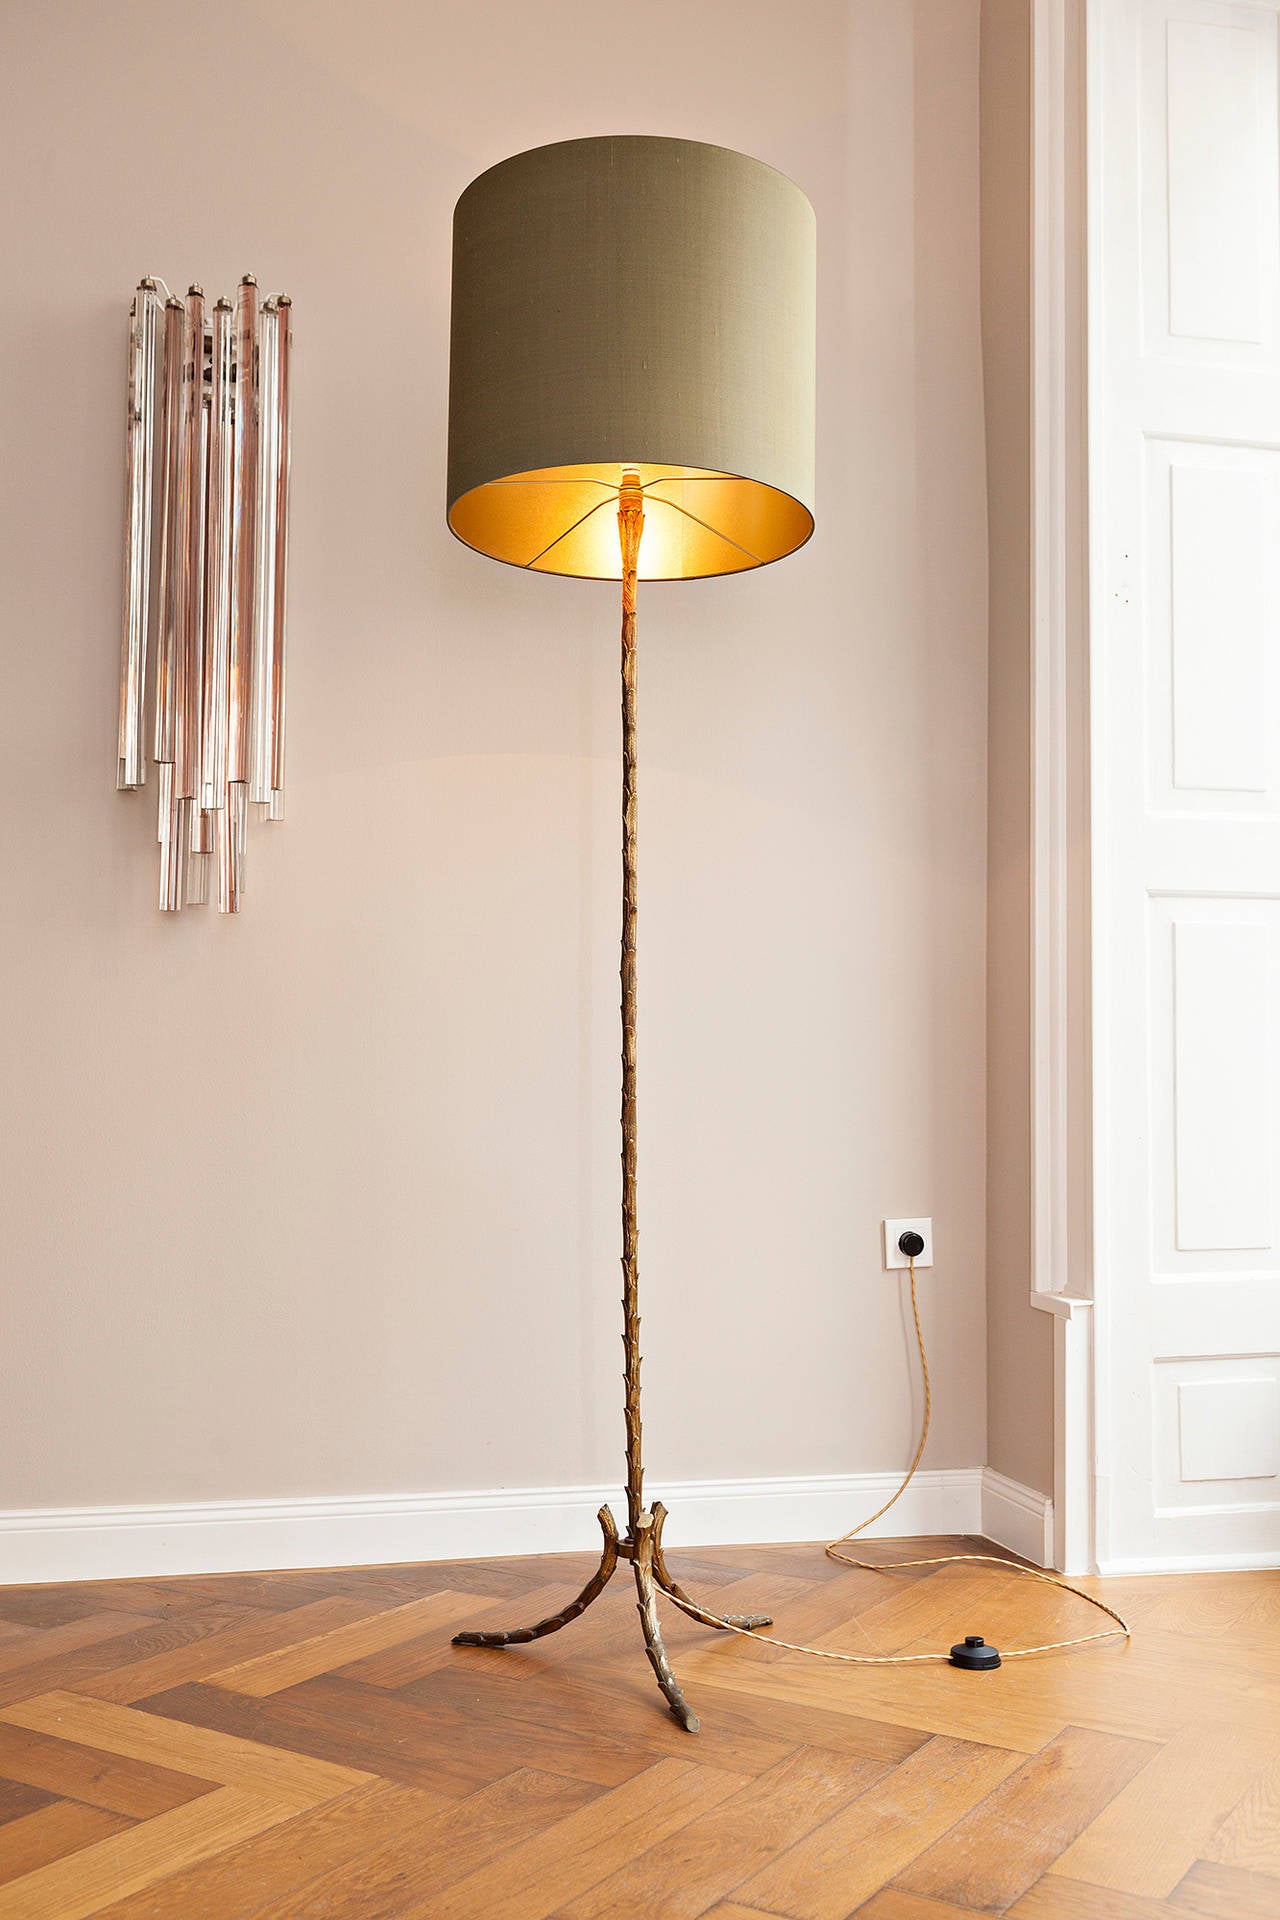 Elegant floor lamp by Maison Baguès, France, circa 1950, gilt bronze floor lamp with tripod base and leaf decoration on stem, very nice patina. Bajonet lamp socket, newly electrified. New handmade shade, gold green dupion silk by Zimmer and Rode,